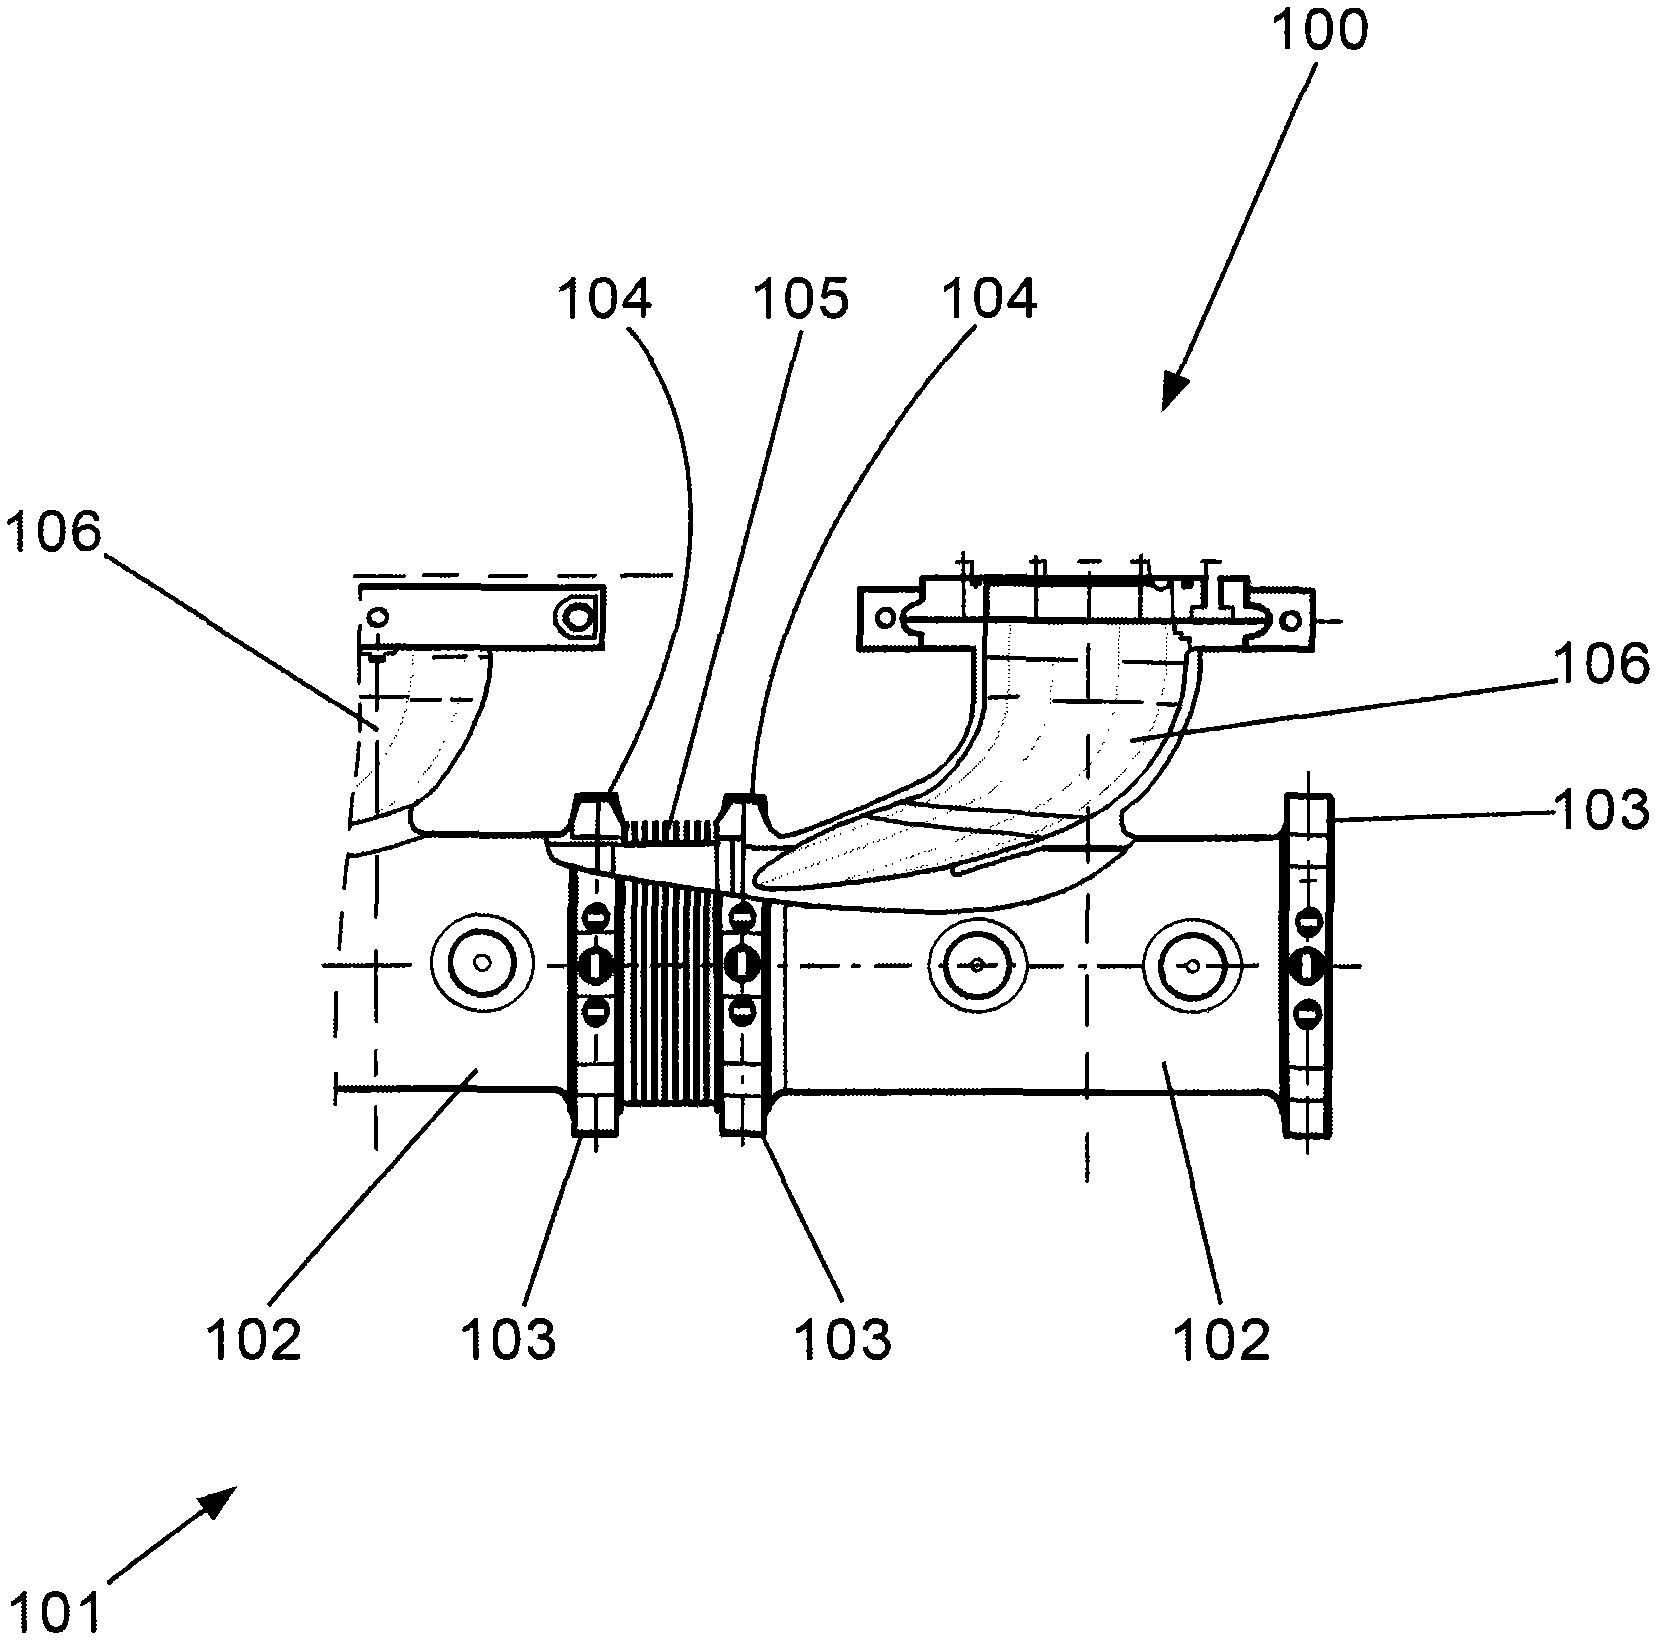 Exhaust line for an internal combustion engine